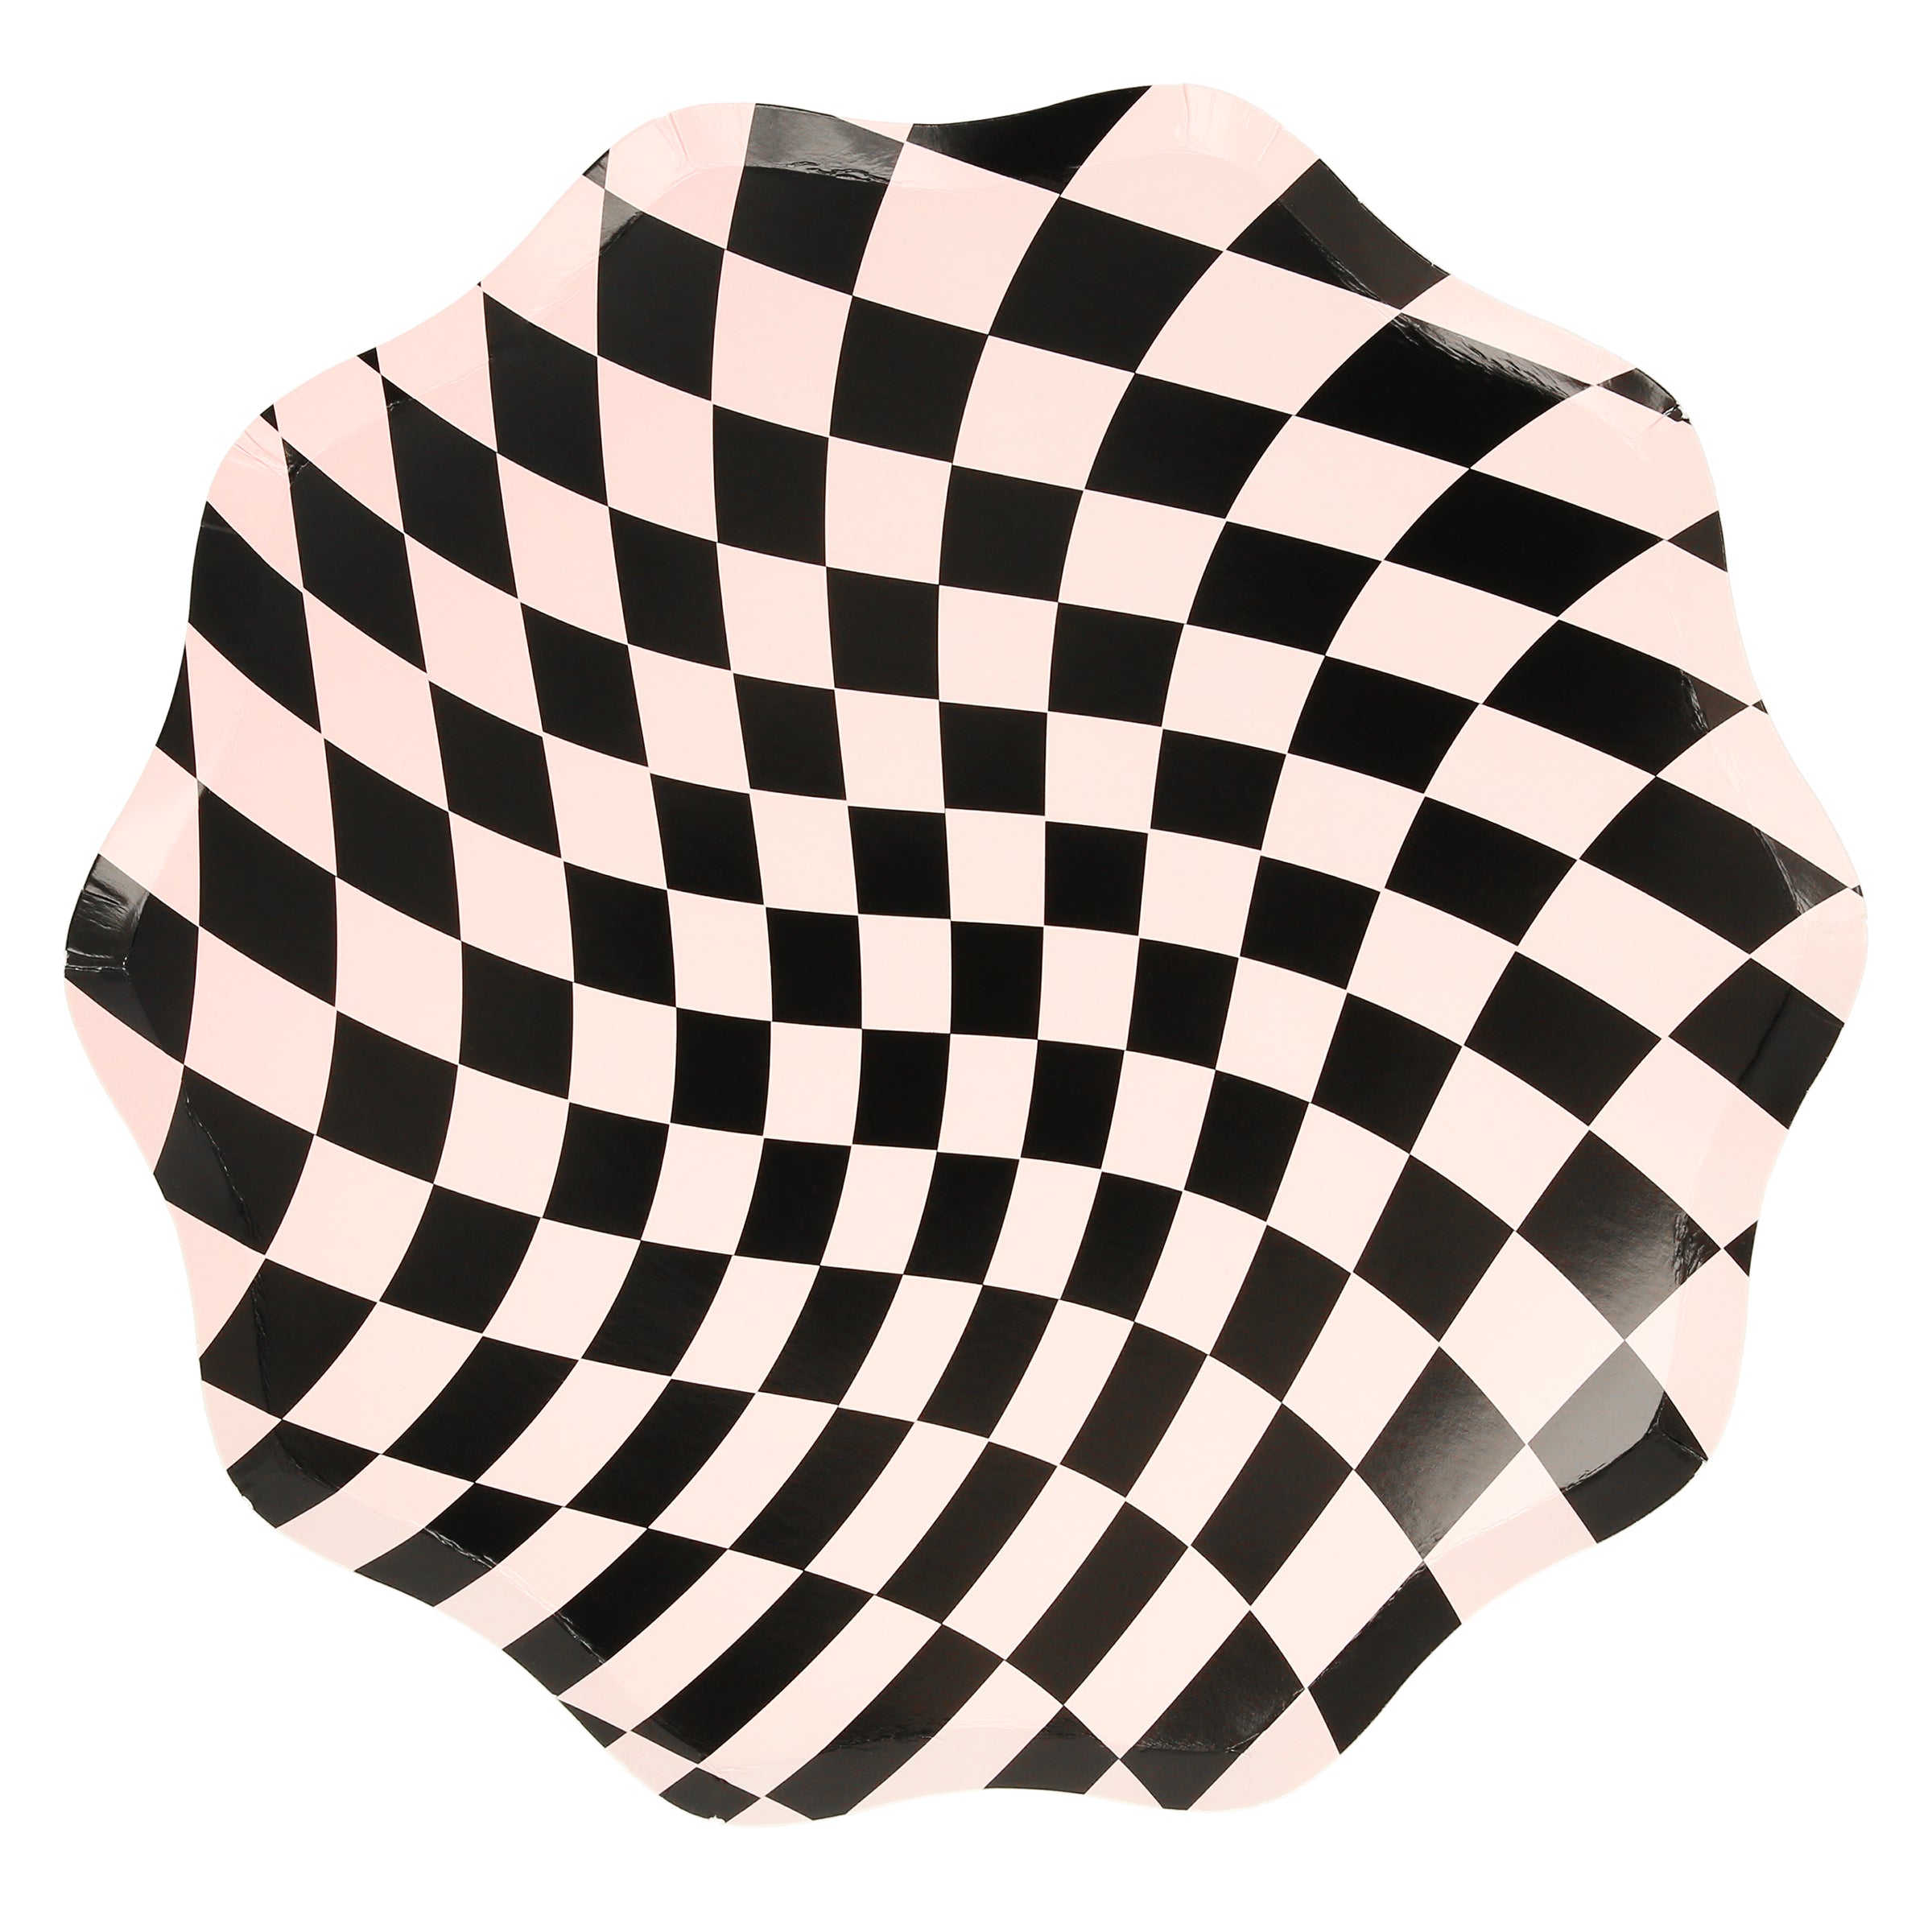 Our party plates are perfect for Halloween party ideas, as the 60s psychedelic checkered pattern looks amazing.